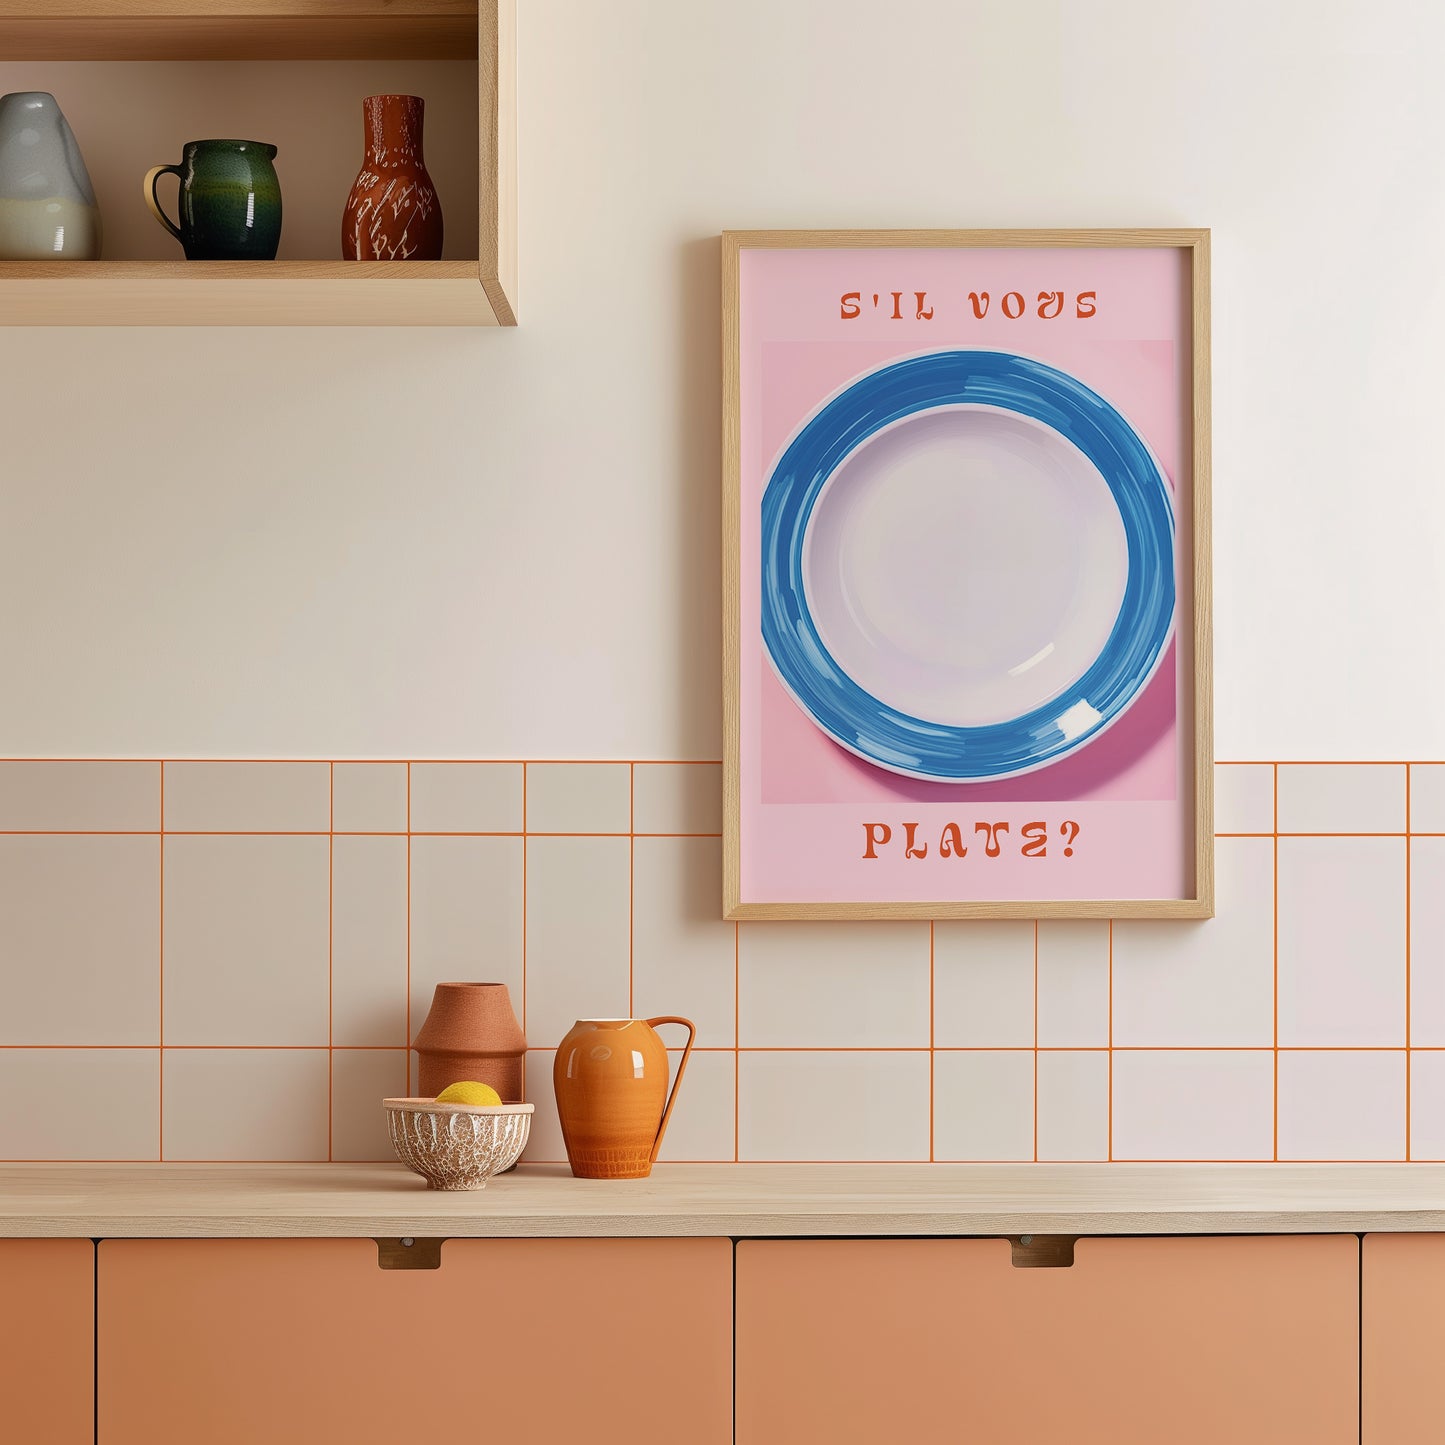 a picture of a plate on a shelf in a kitchen